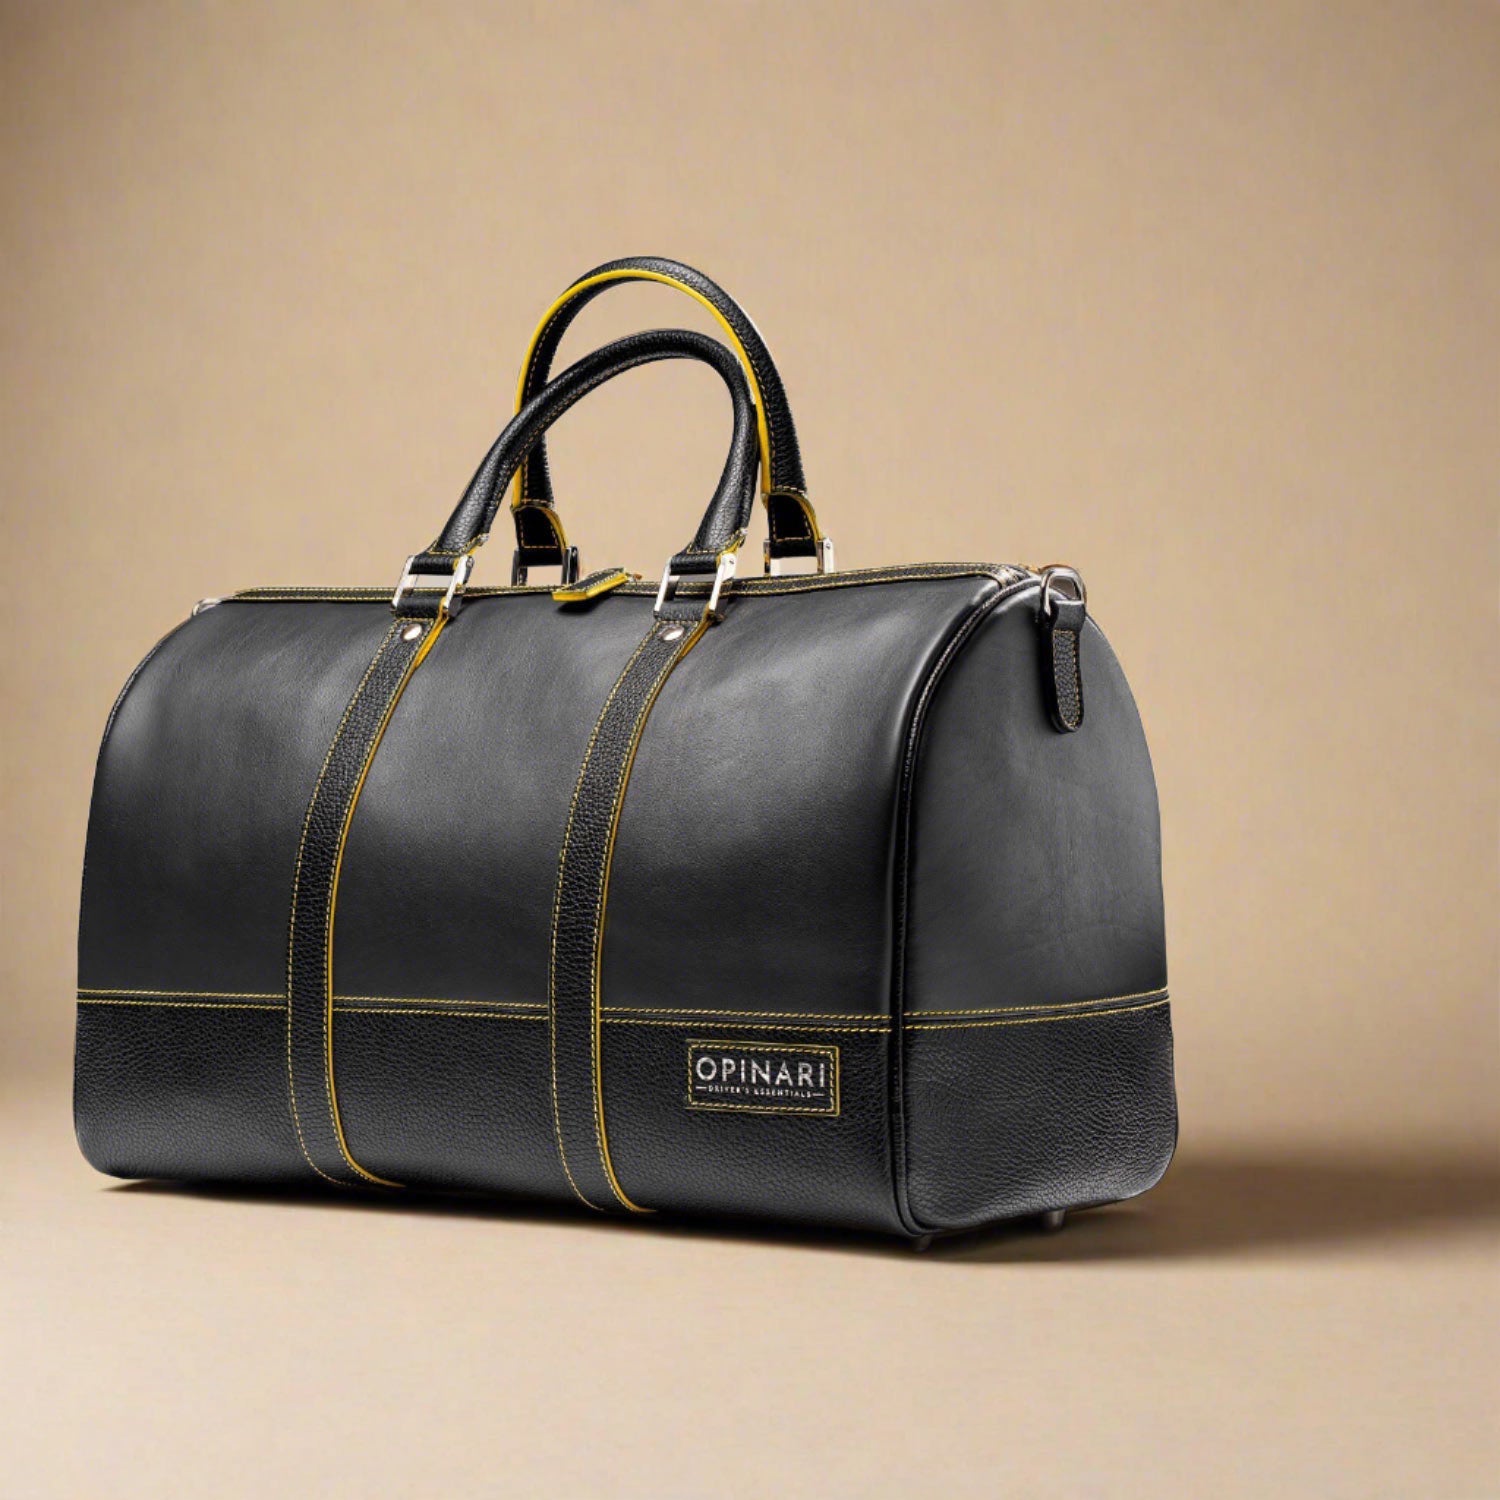 Italian handcrafted duffle bag in yellow black and grey